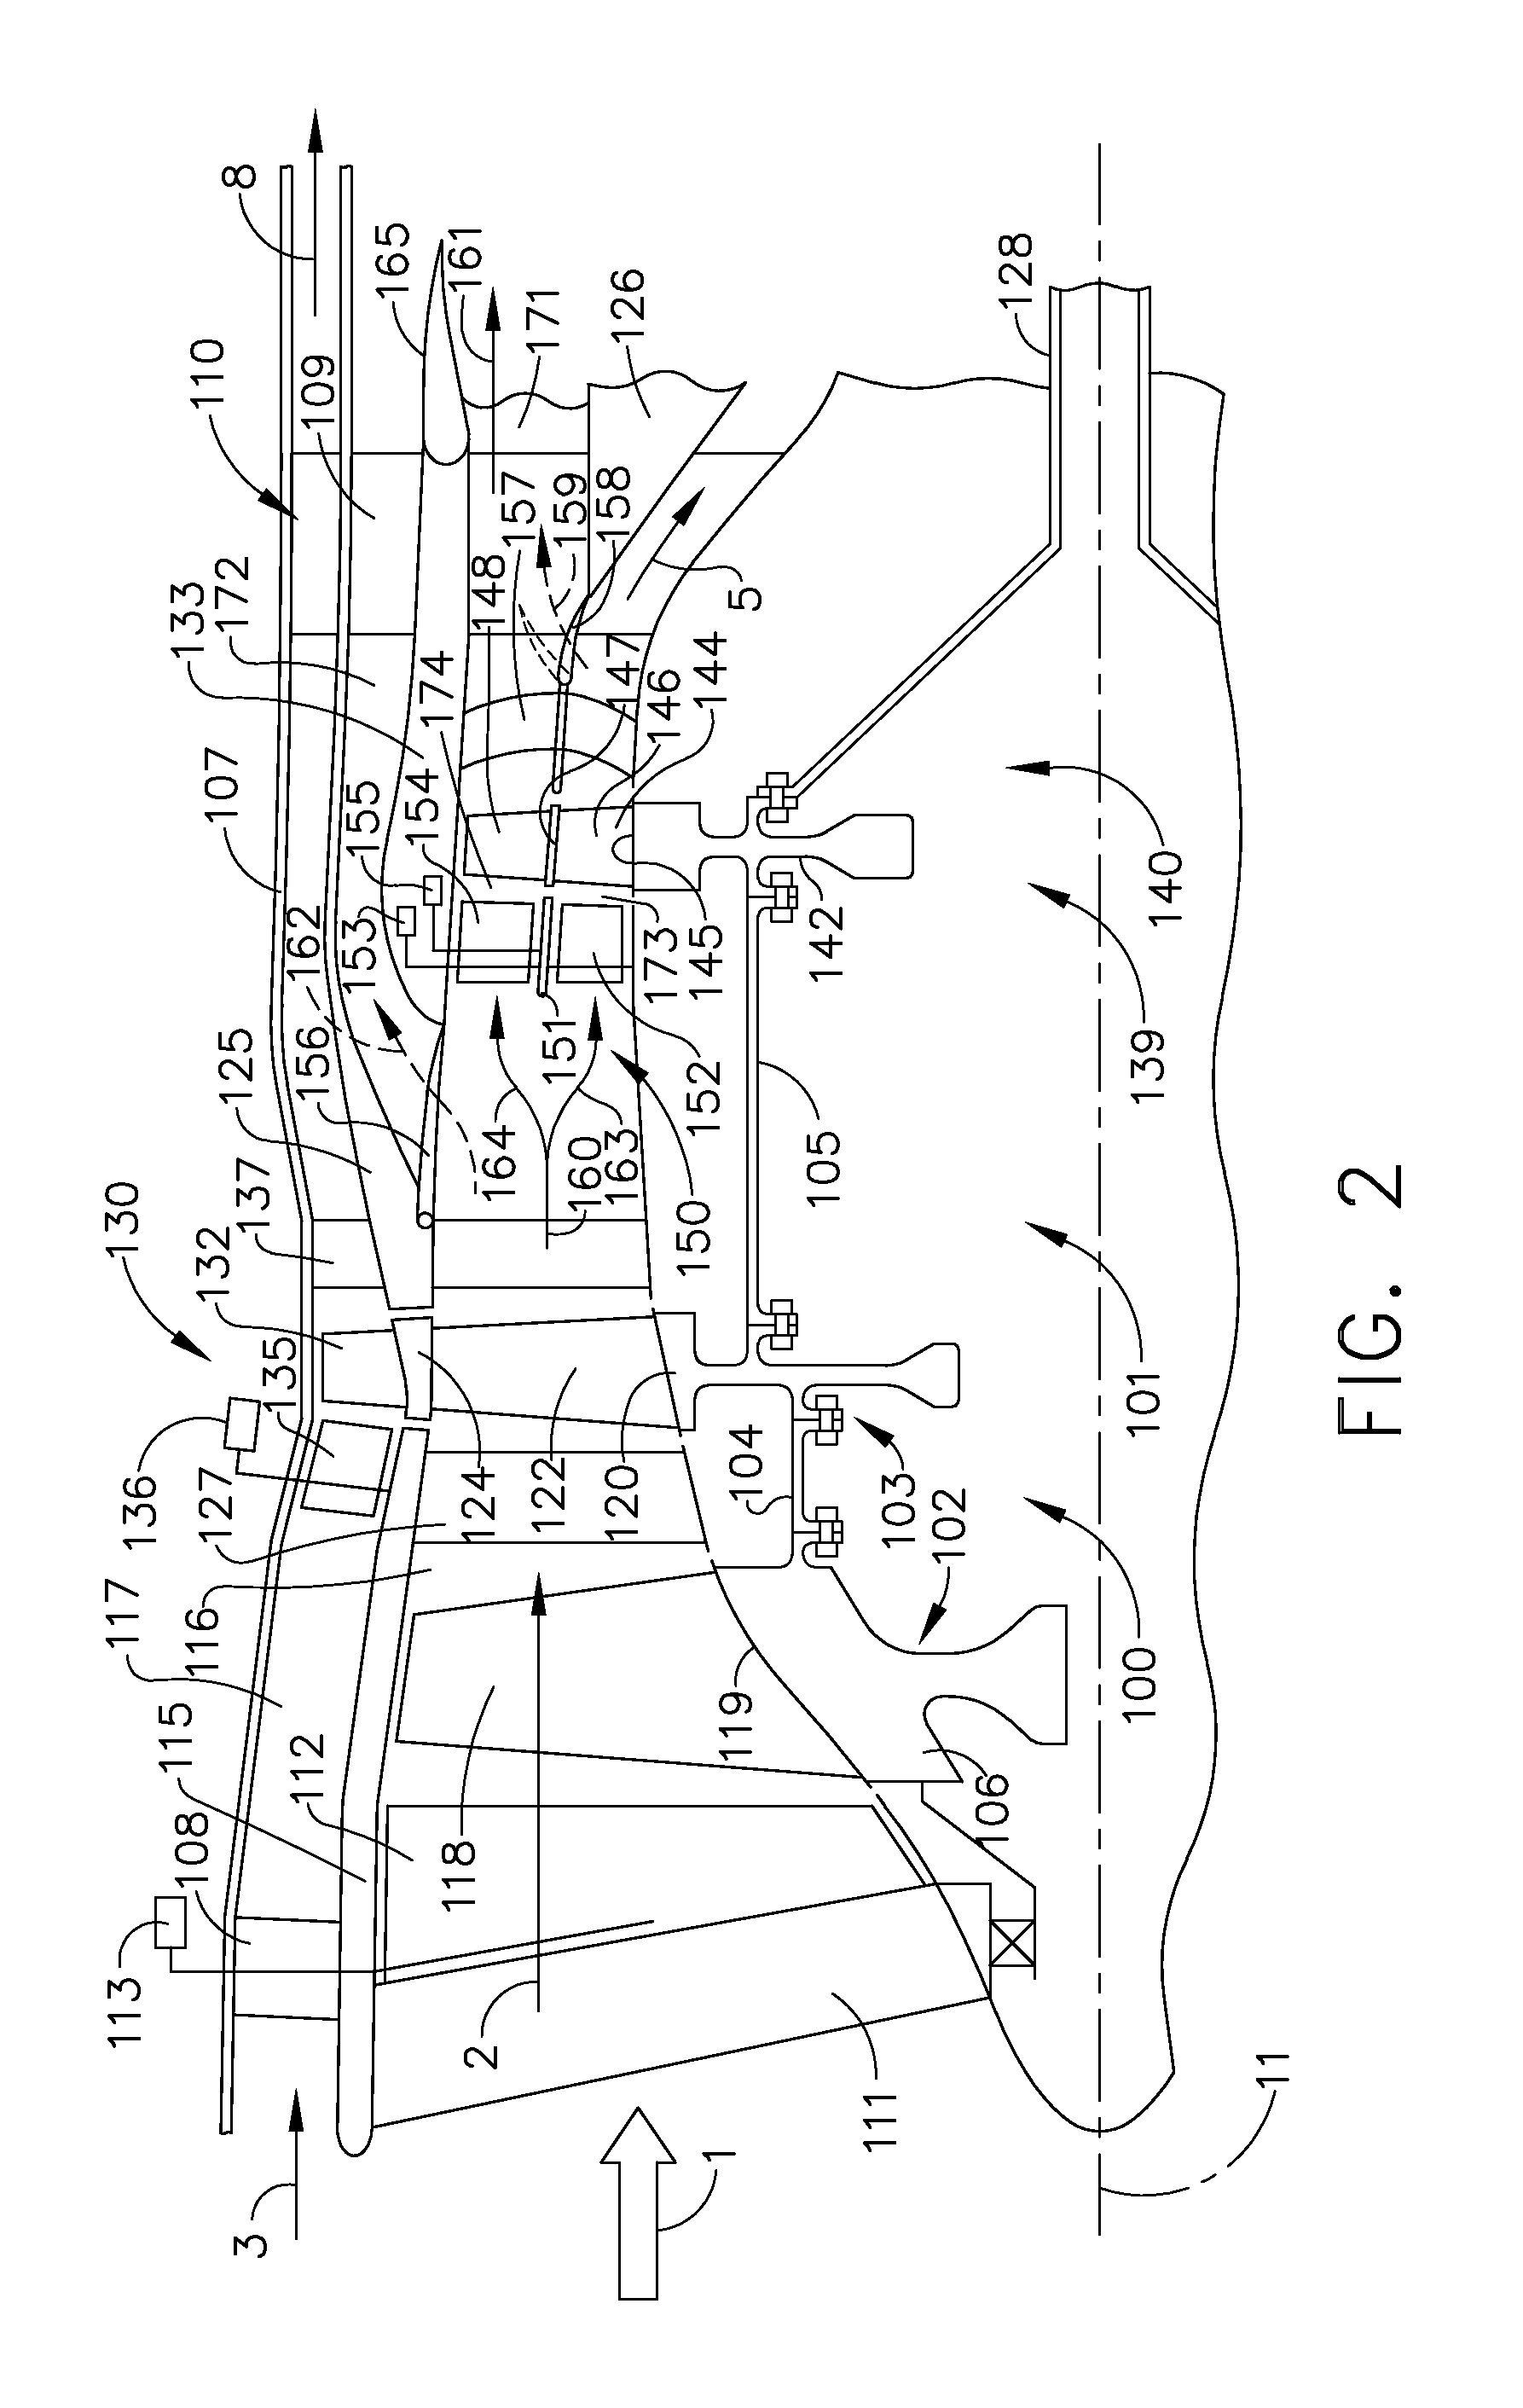 Method of operating a convertible fan engine